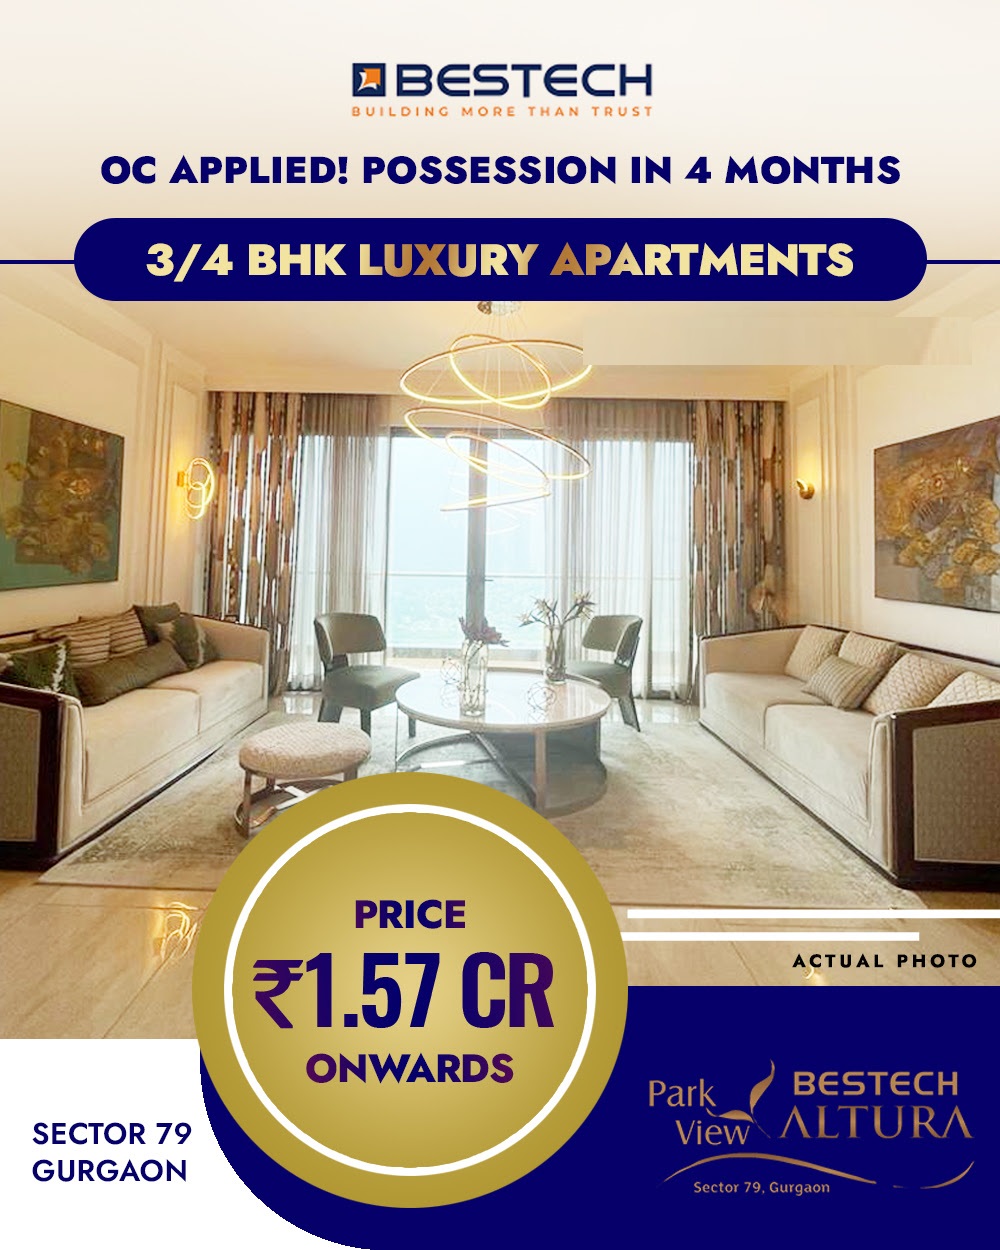 OC Applied and possession in 4 months at Bestech Altura in Sector 79, Gurgaon Update